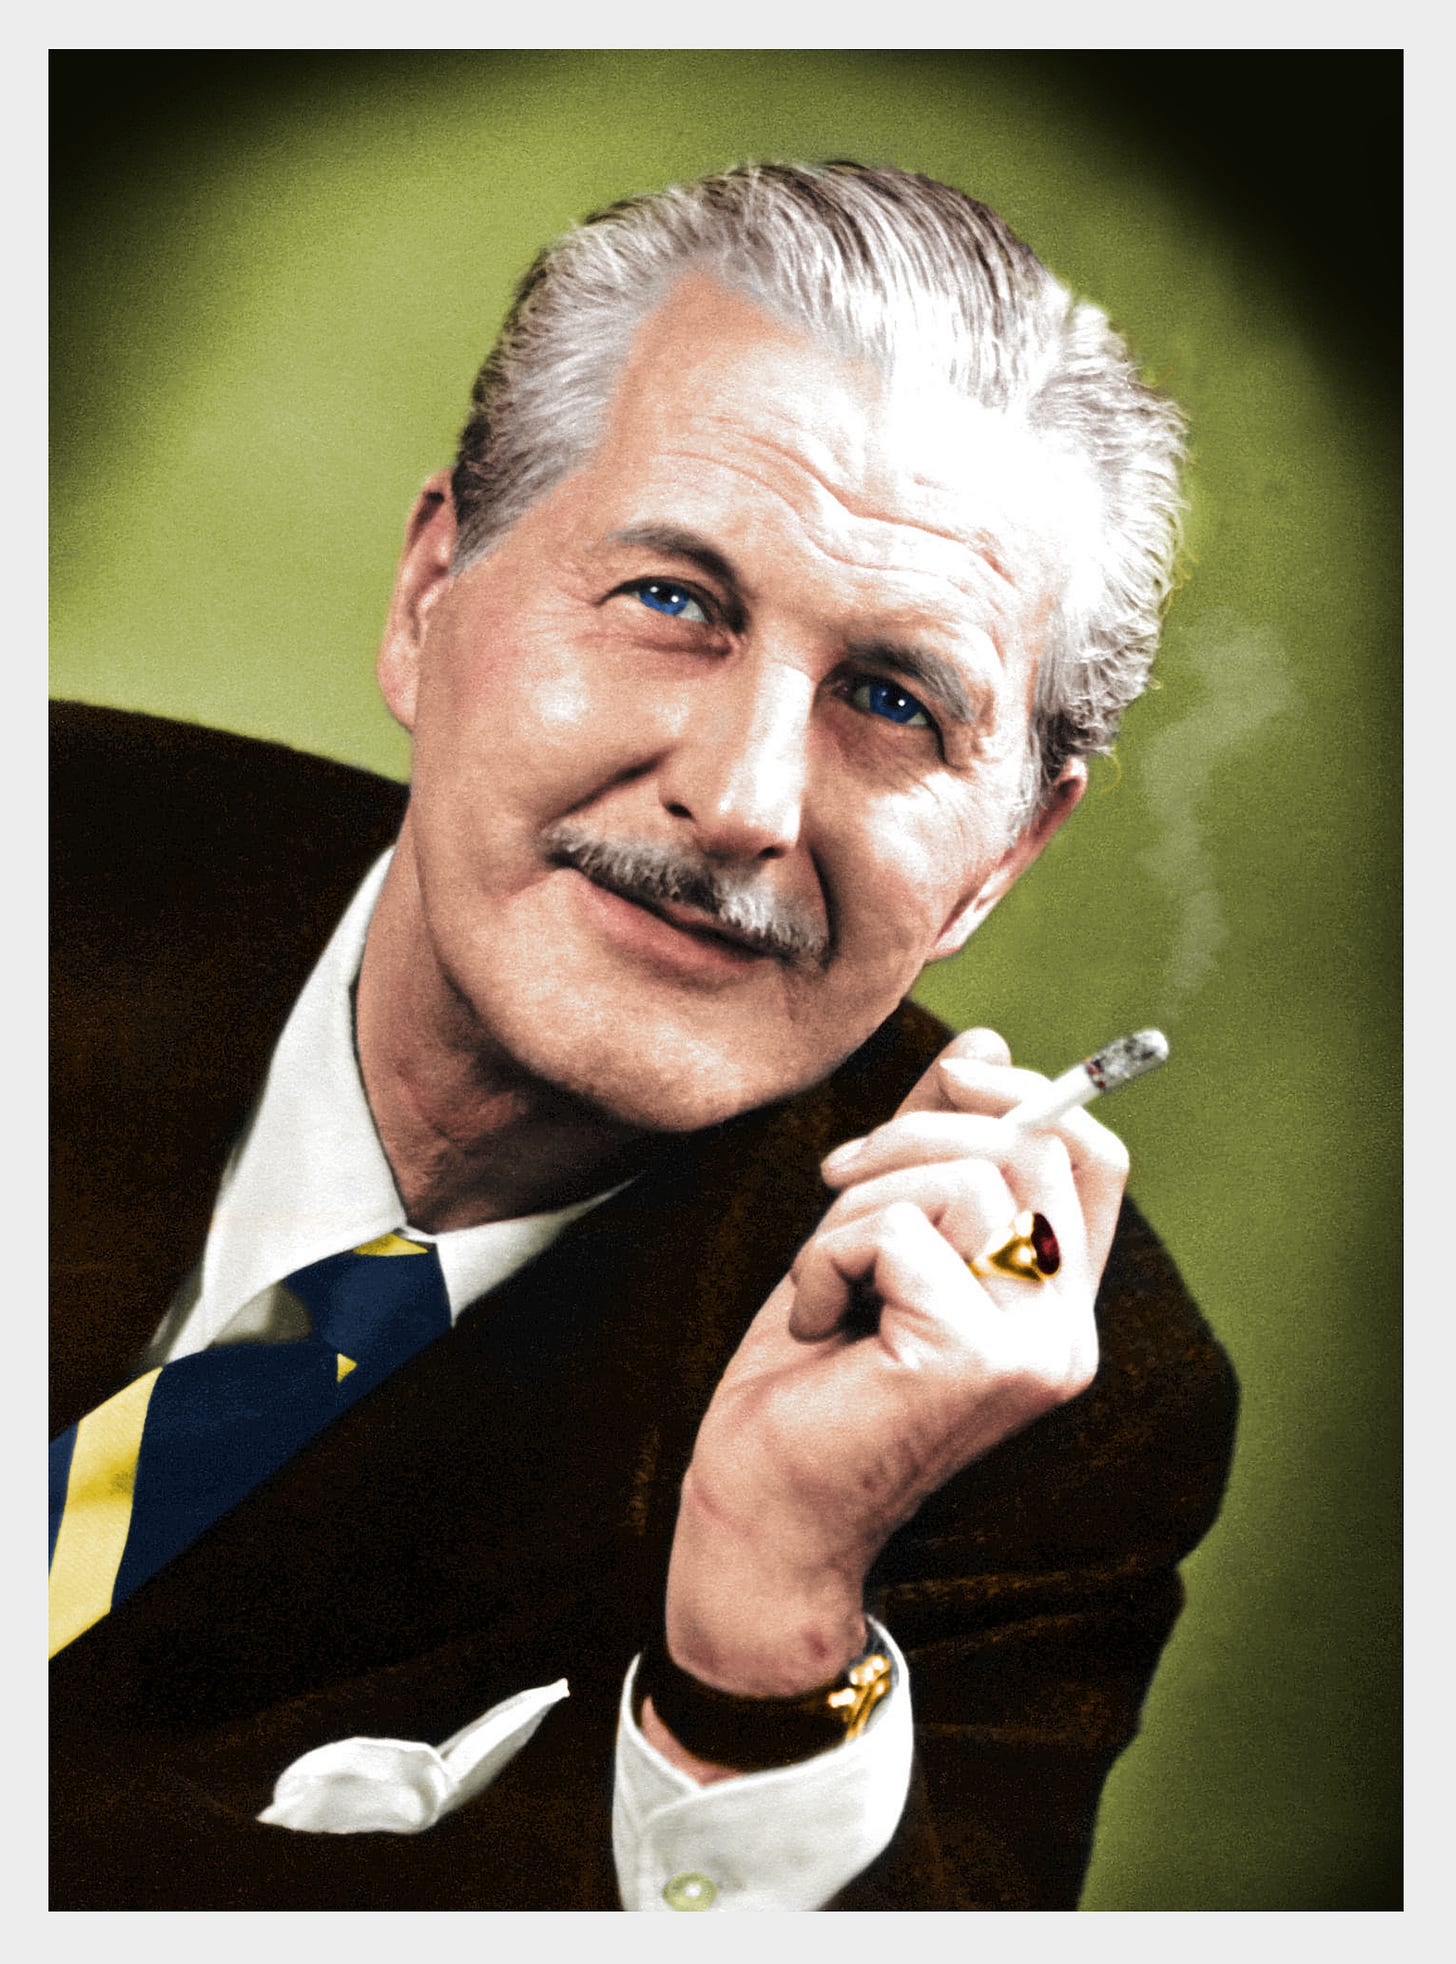 A man with blue eyes, grey hair and a moustache smoking a cigarette.